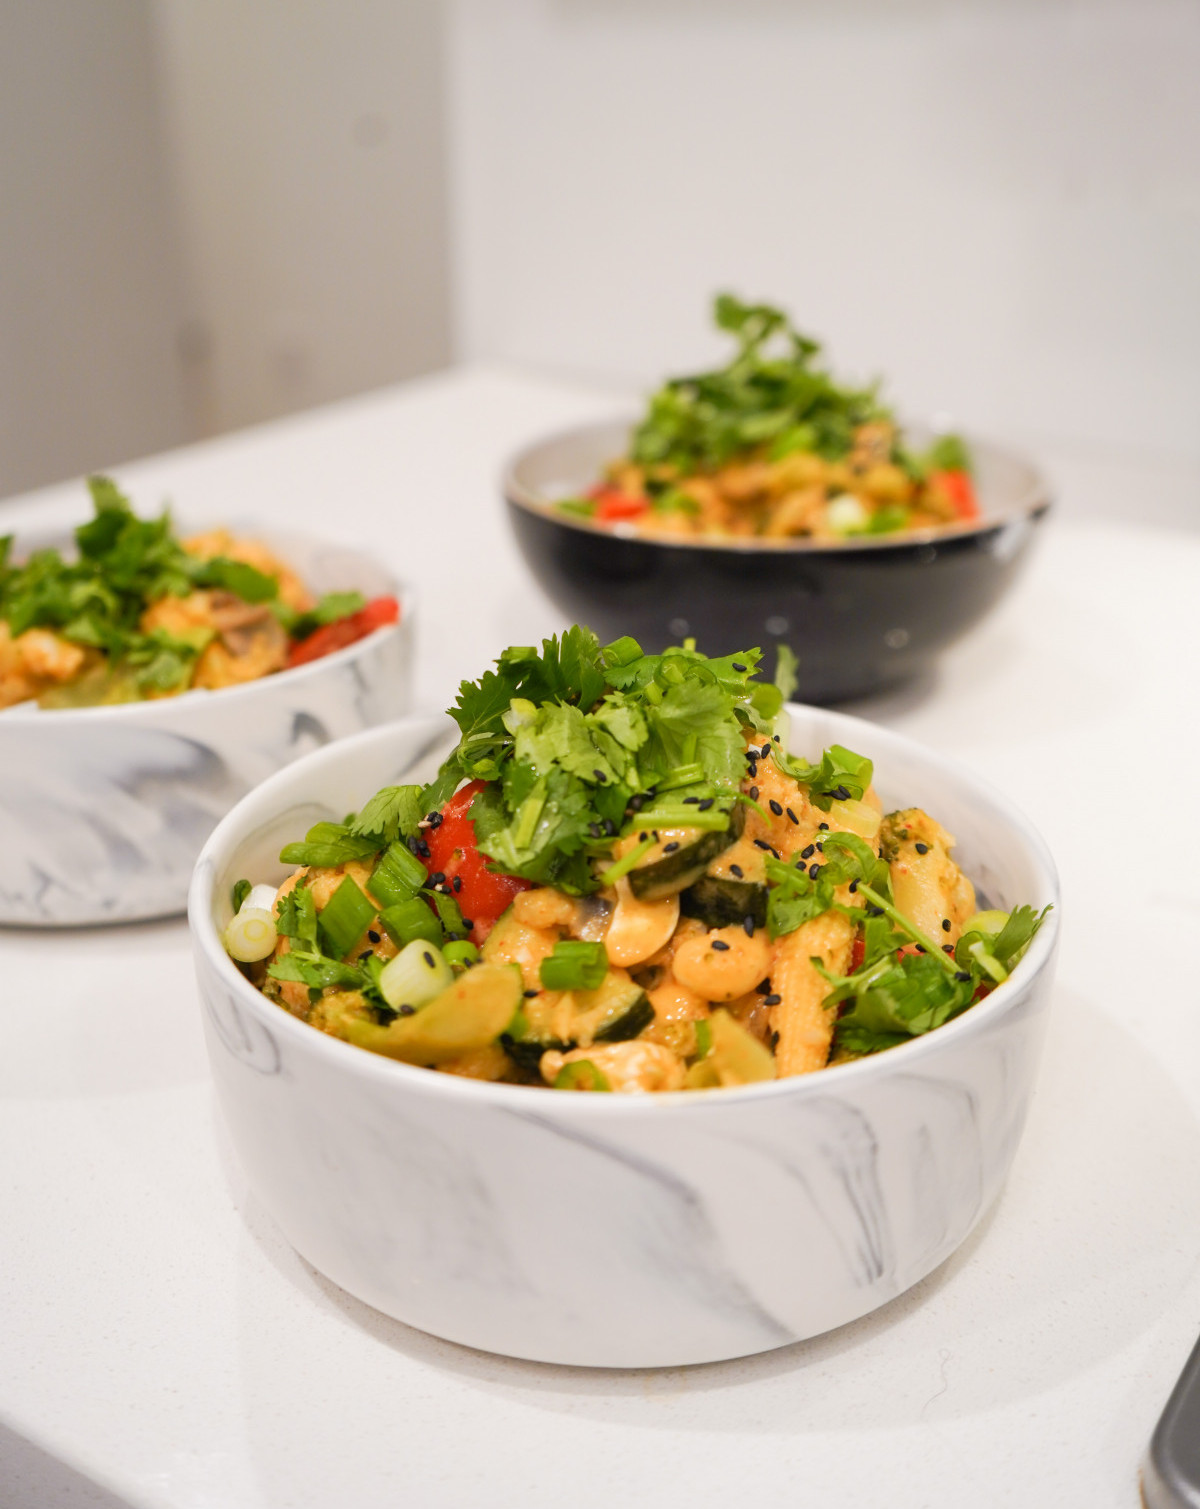 A dish of coconut Thai curry